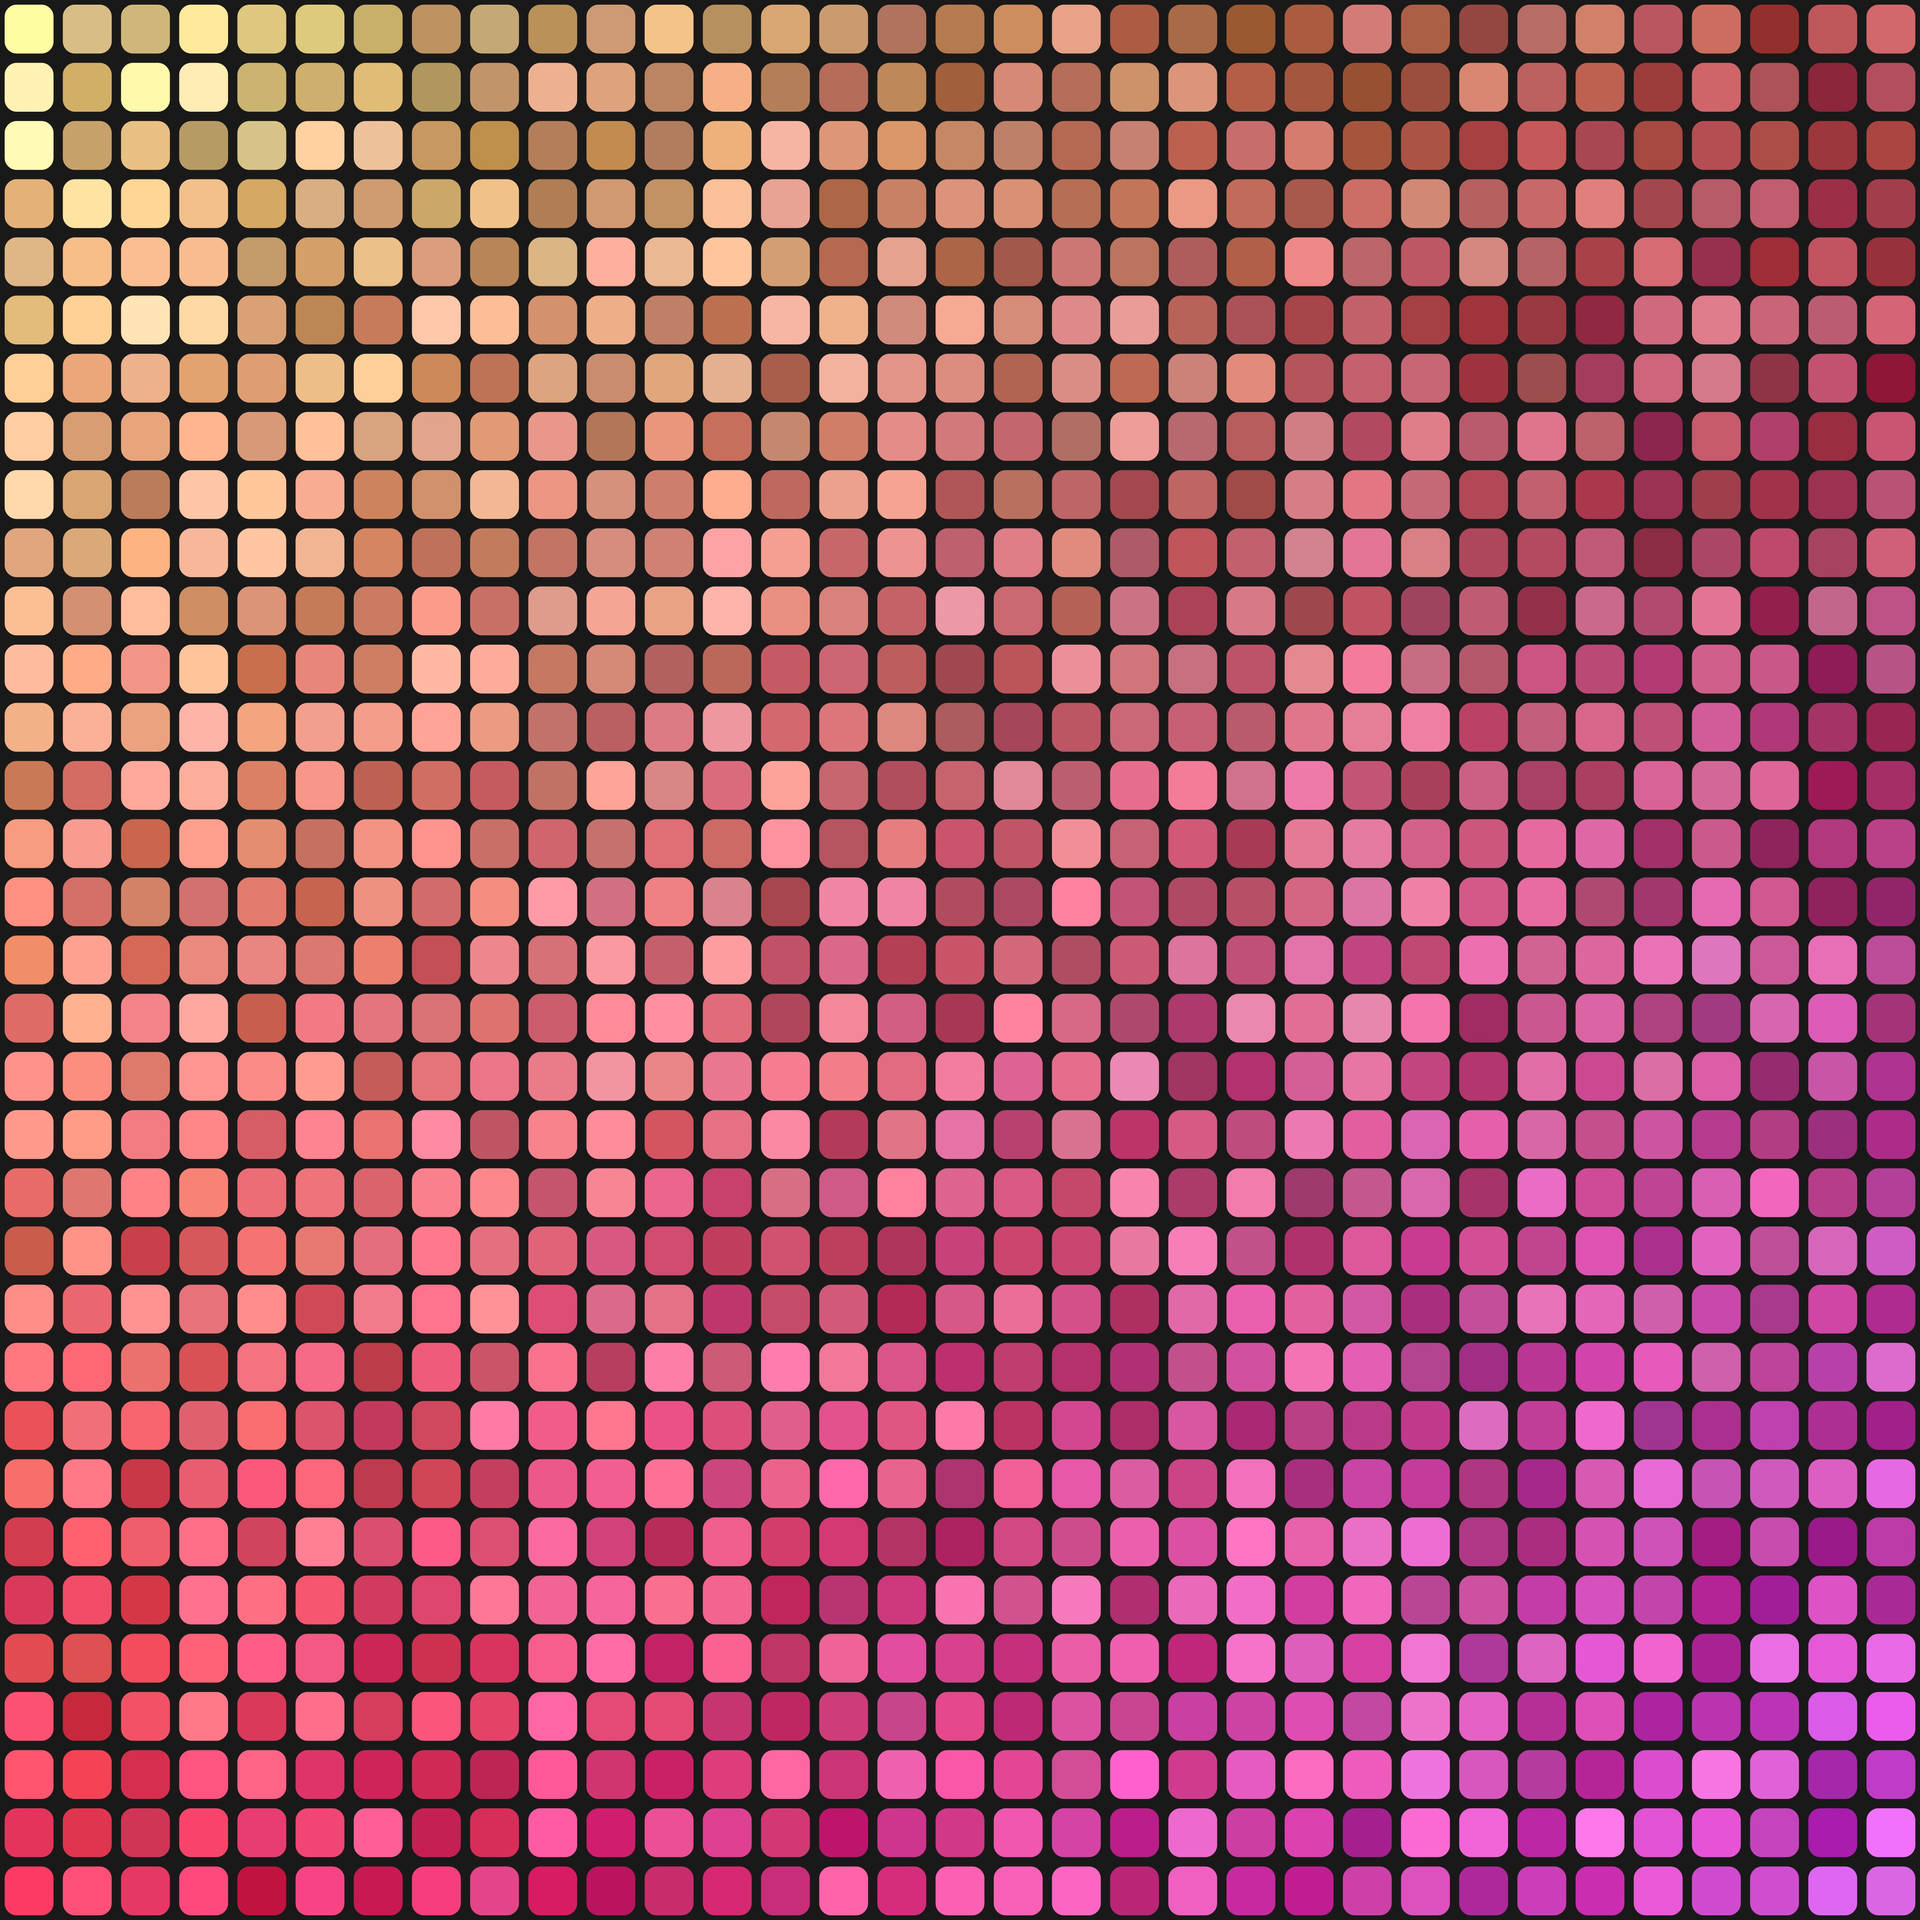 Gradient 5000X5000 Wallpaper and Background Image